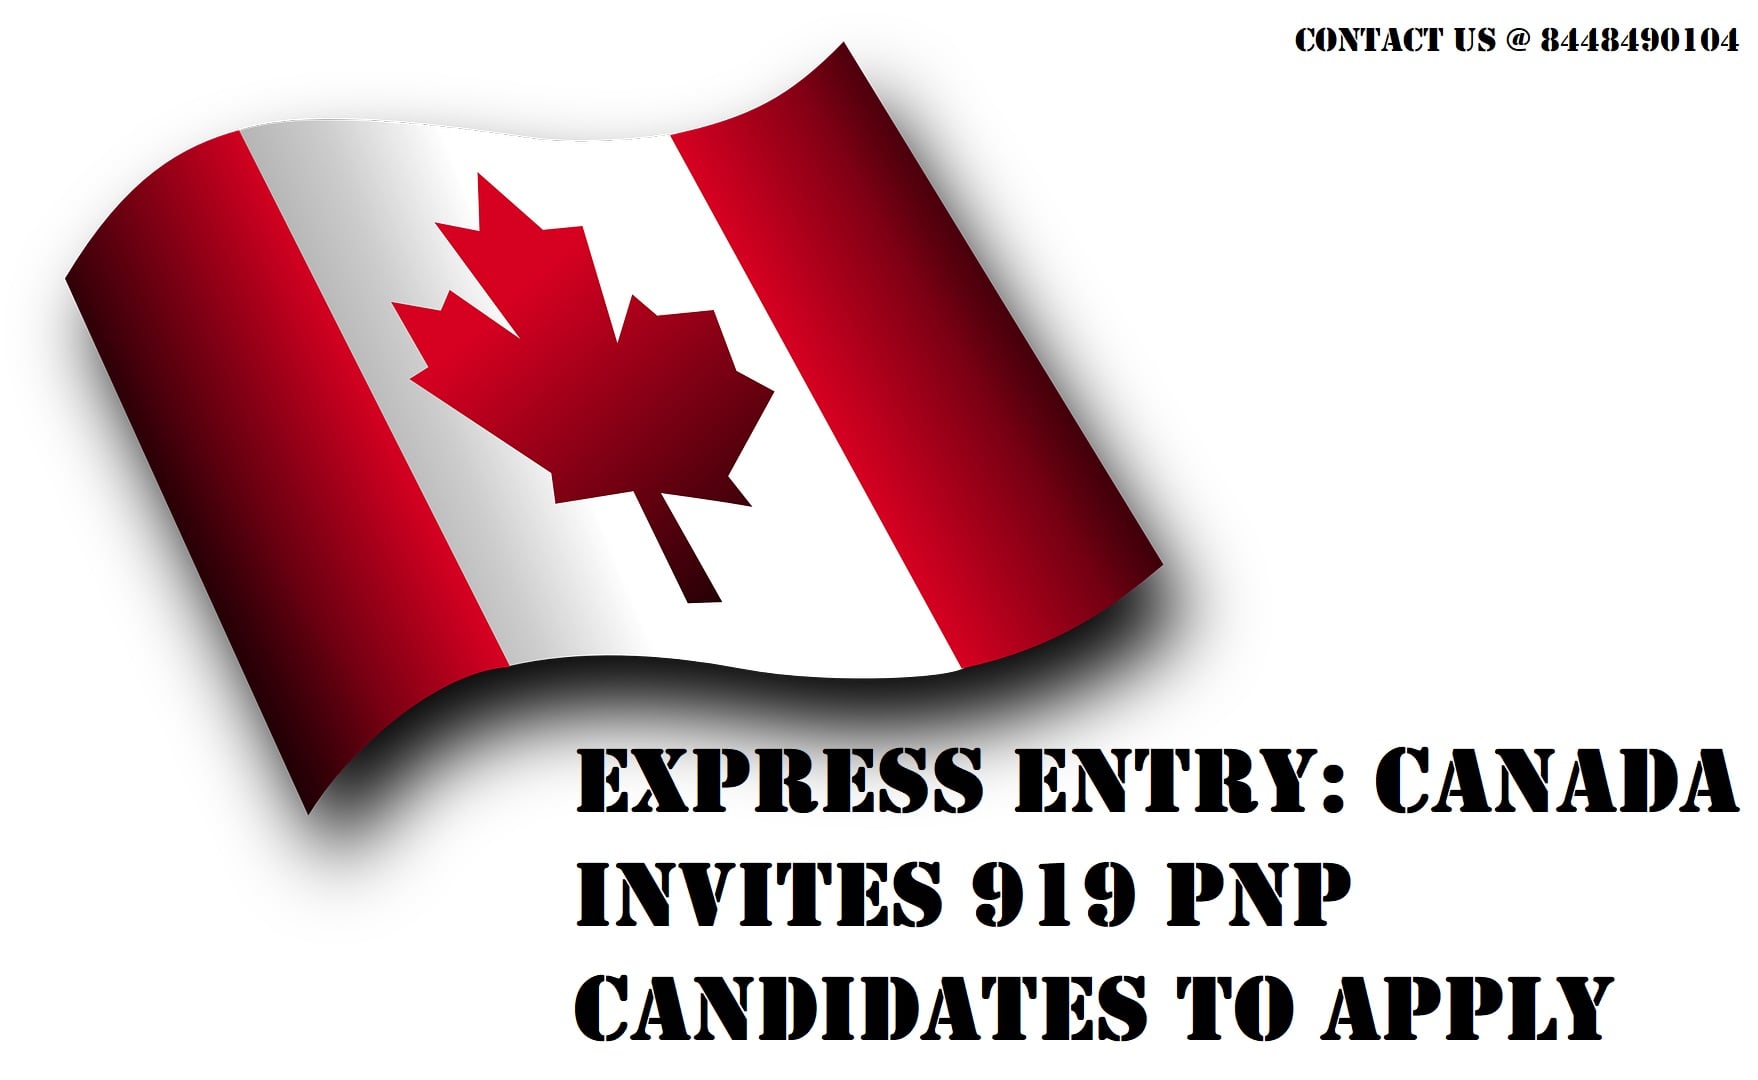 Canada invited 919 Express Entry